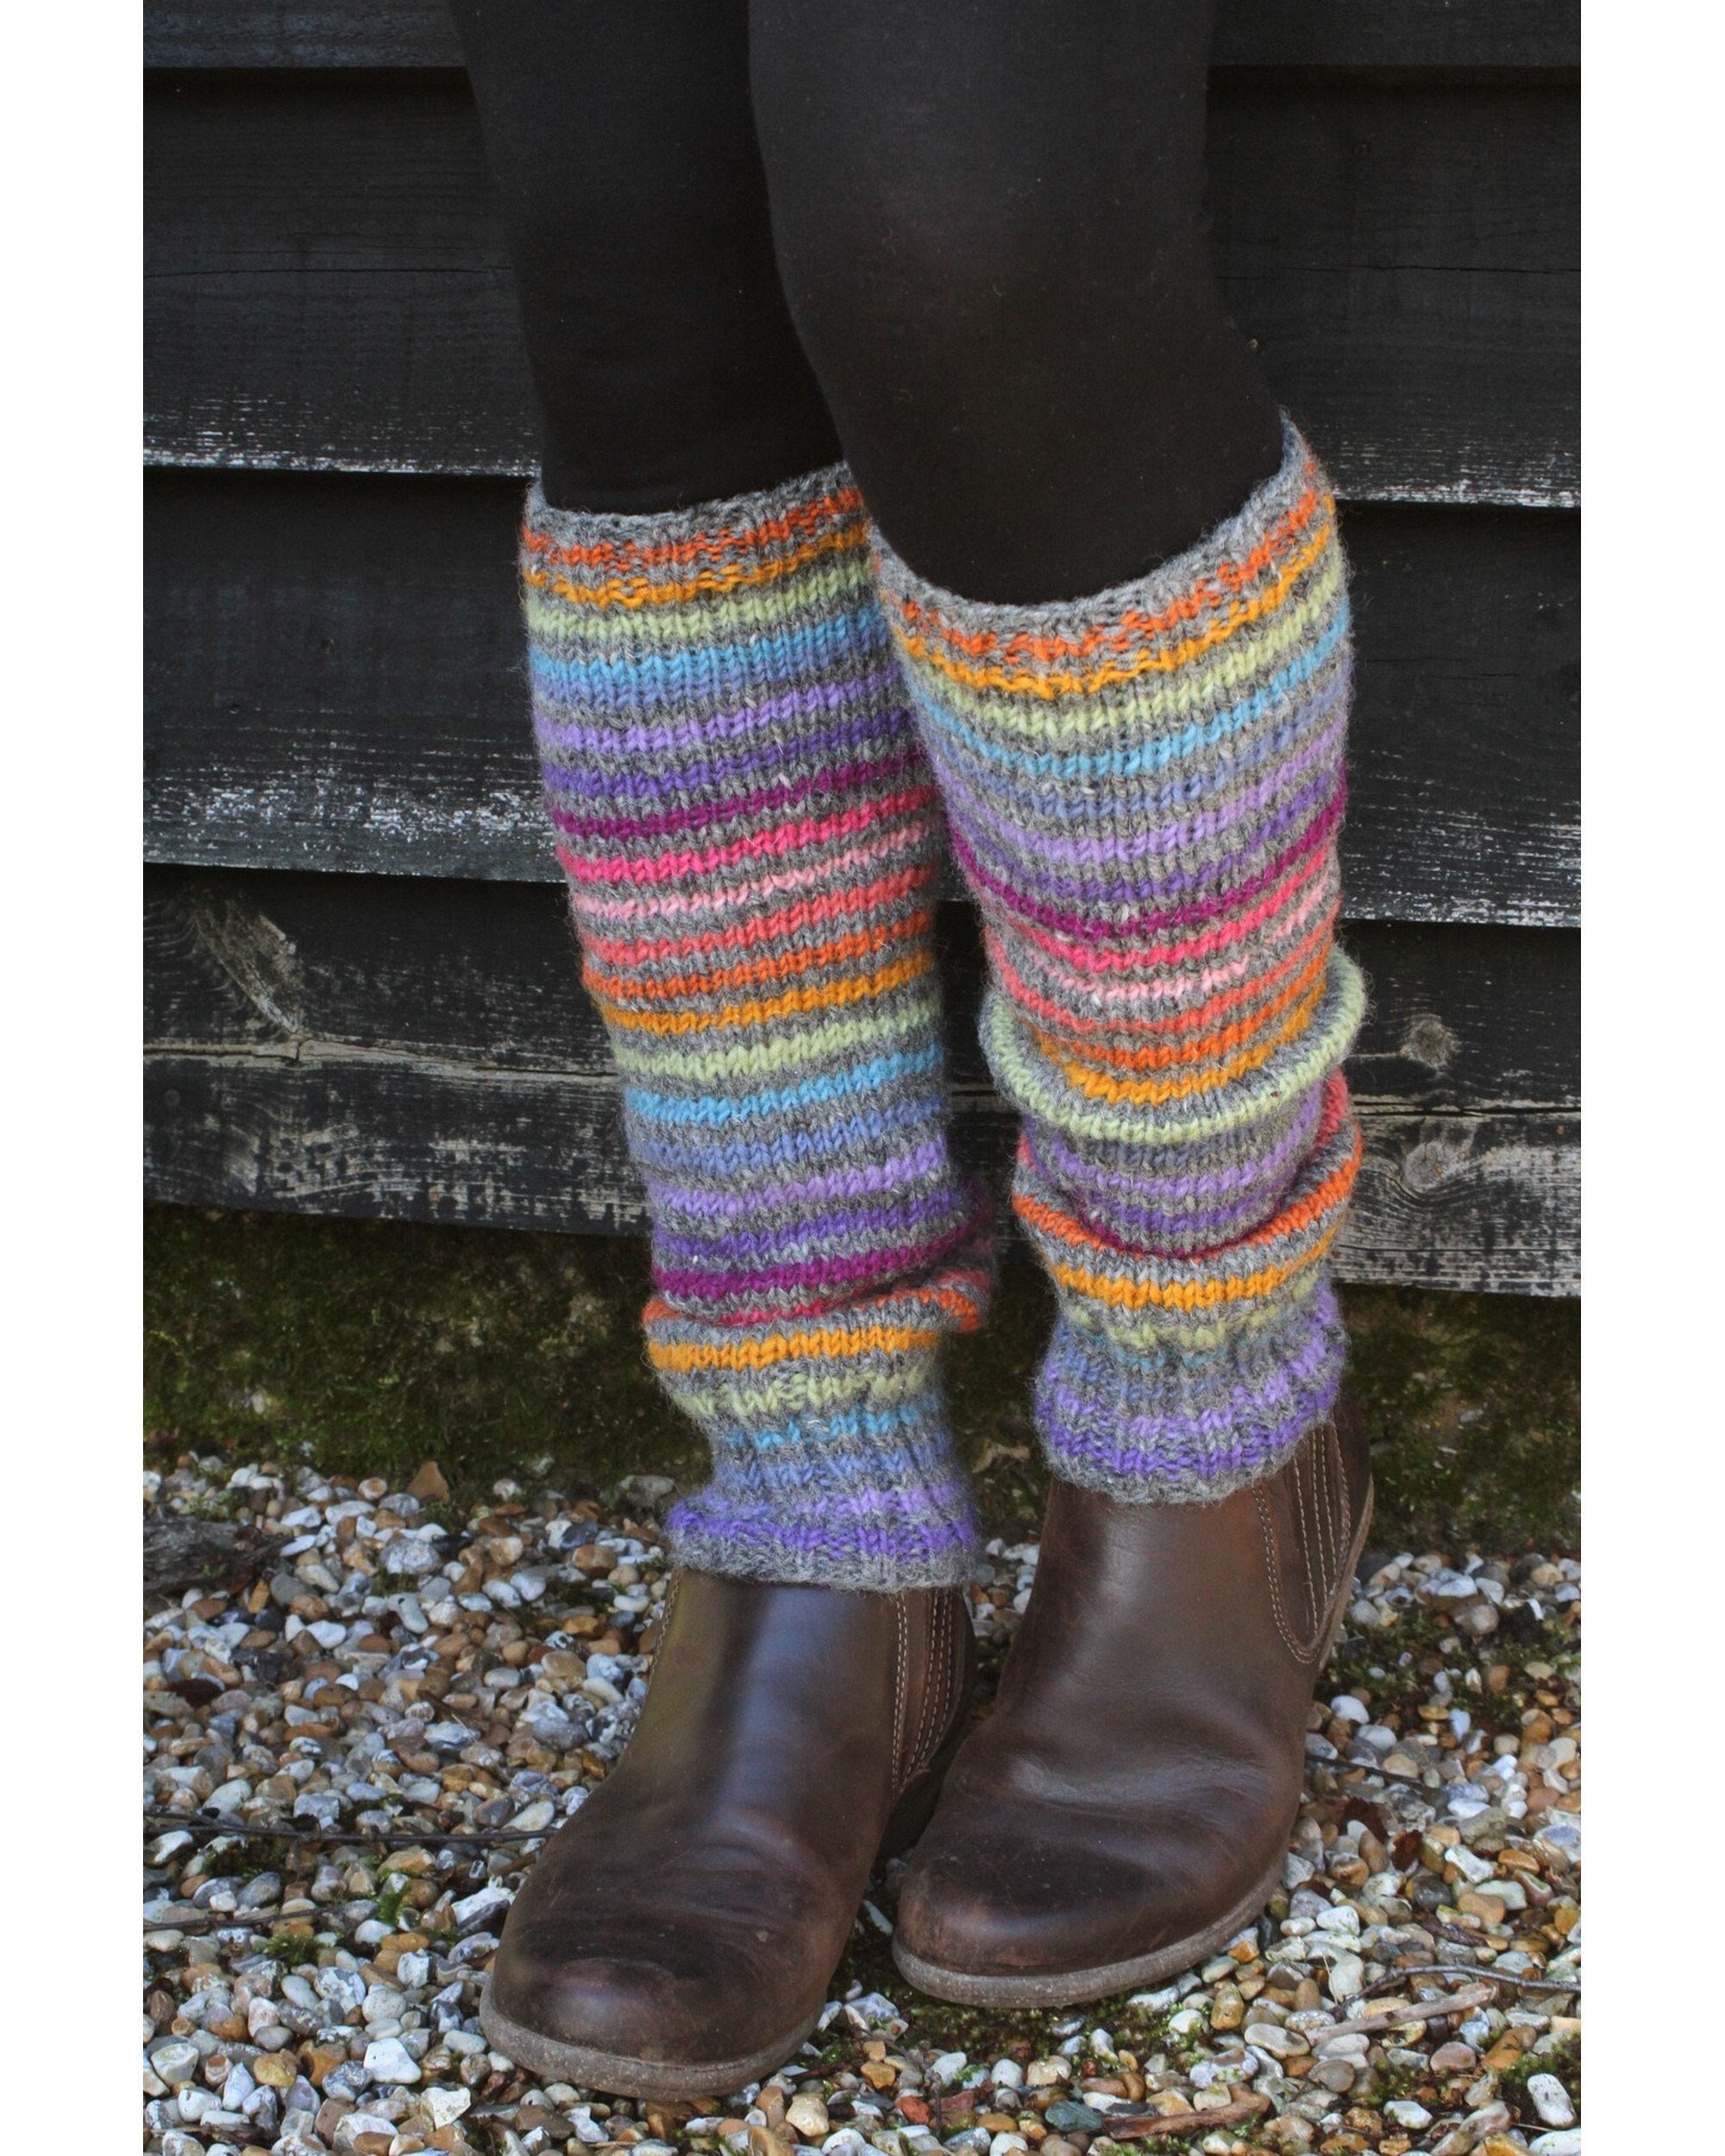 Rainbow Ribbed Knit Knee High Socks For Women Fashionable Rainbow Leg  Warmers  For Parties And Sports Striped Match With Available From  Greatamy, $2.37